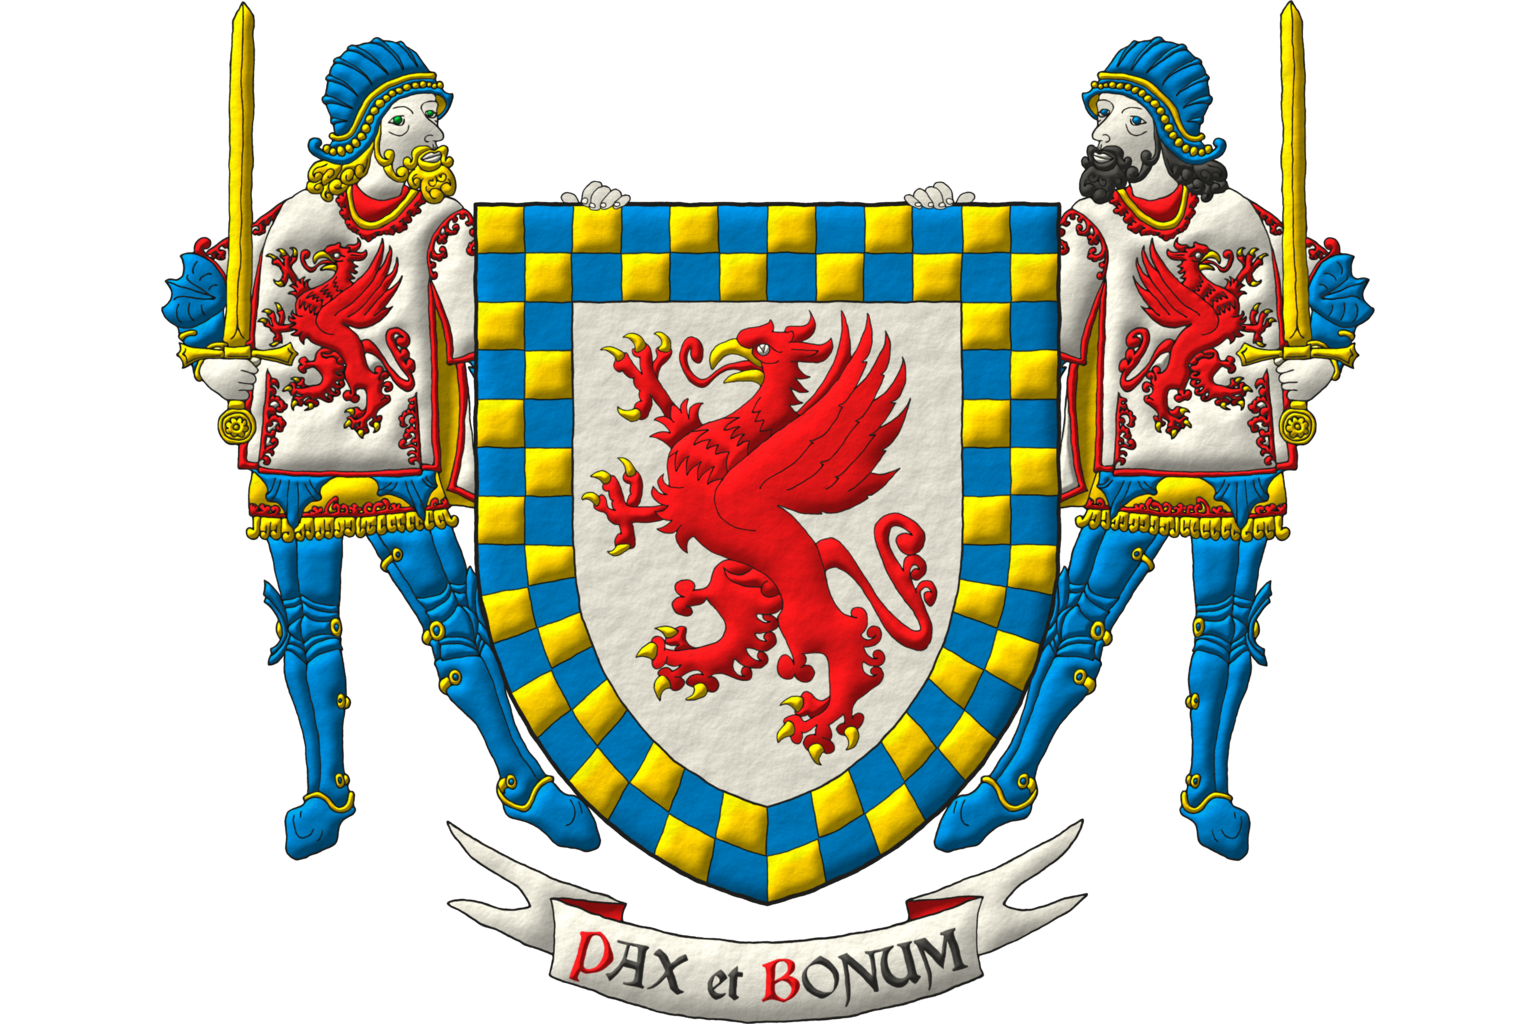 Blazon: Argent, a griffin segreant Gules, armed and beaked Or; a bordure compony counter-compony Or and Azure. Supporters: two knights Argent, armored Azure and Or, vested with tabards Argent charged with a griffins  segreant Gules, the dexter, crined and bearded Or, the eyes Vert, grasping in his dexter hand a sword point upwards Or, the sinister, crined and bearded Sable, the eyes Azure, grasping in his sinister hand a sword point upwards Or. Motto: «Pax et Bonum».